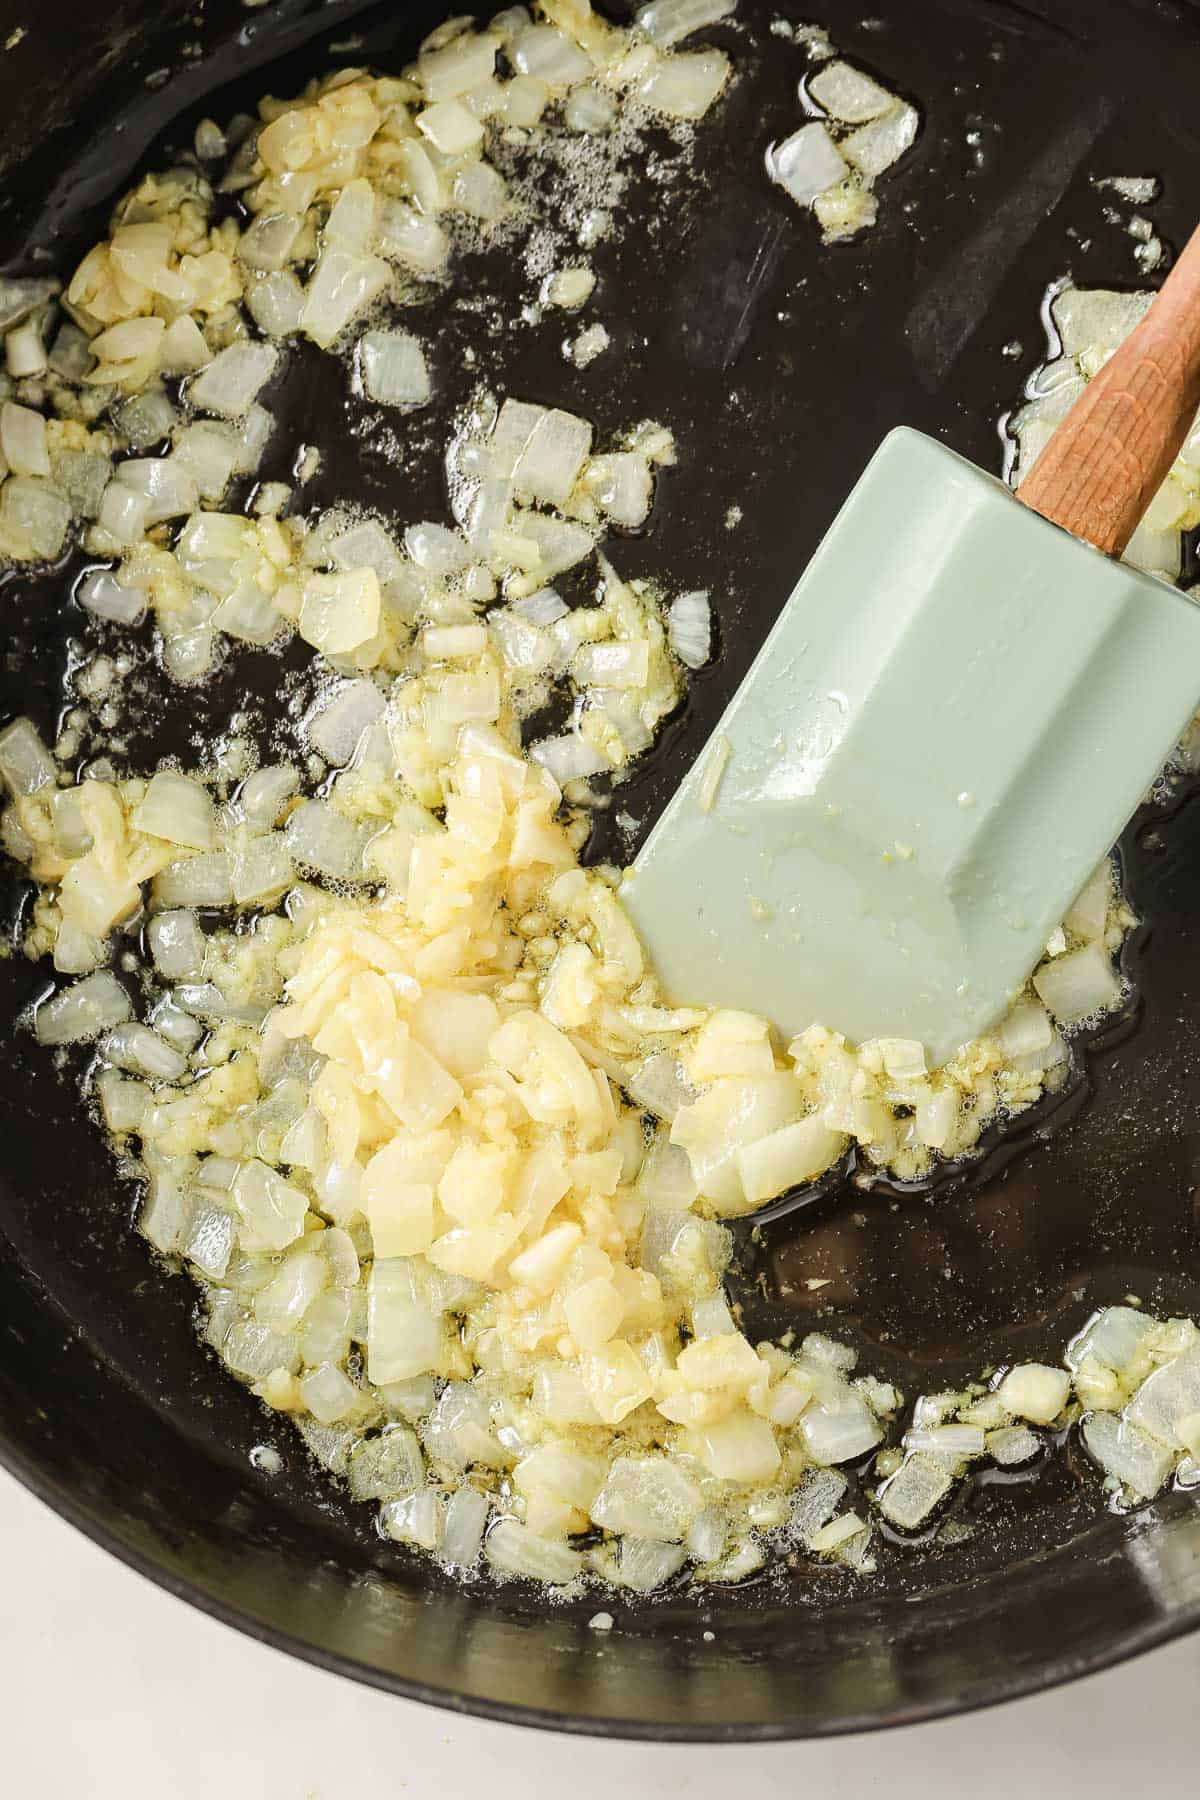 A cast iron skillet with chopped onions sautéing in butter.